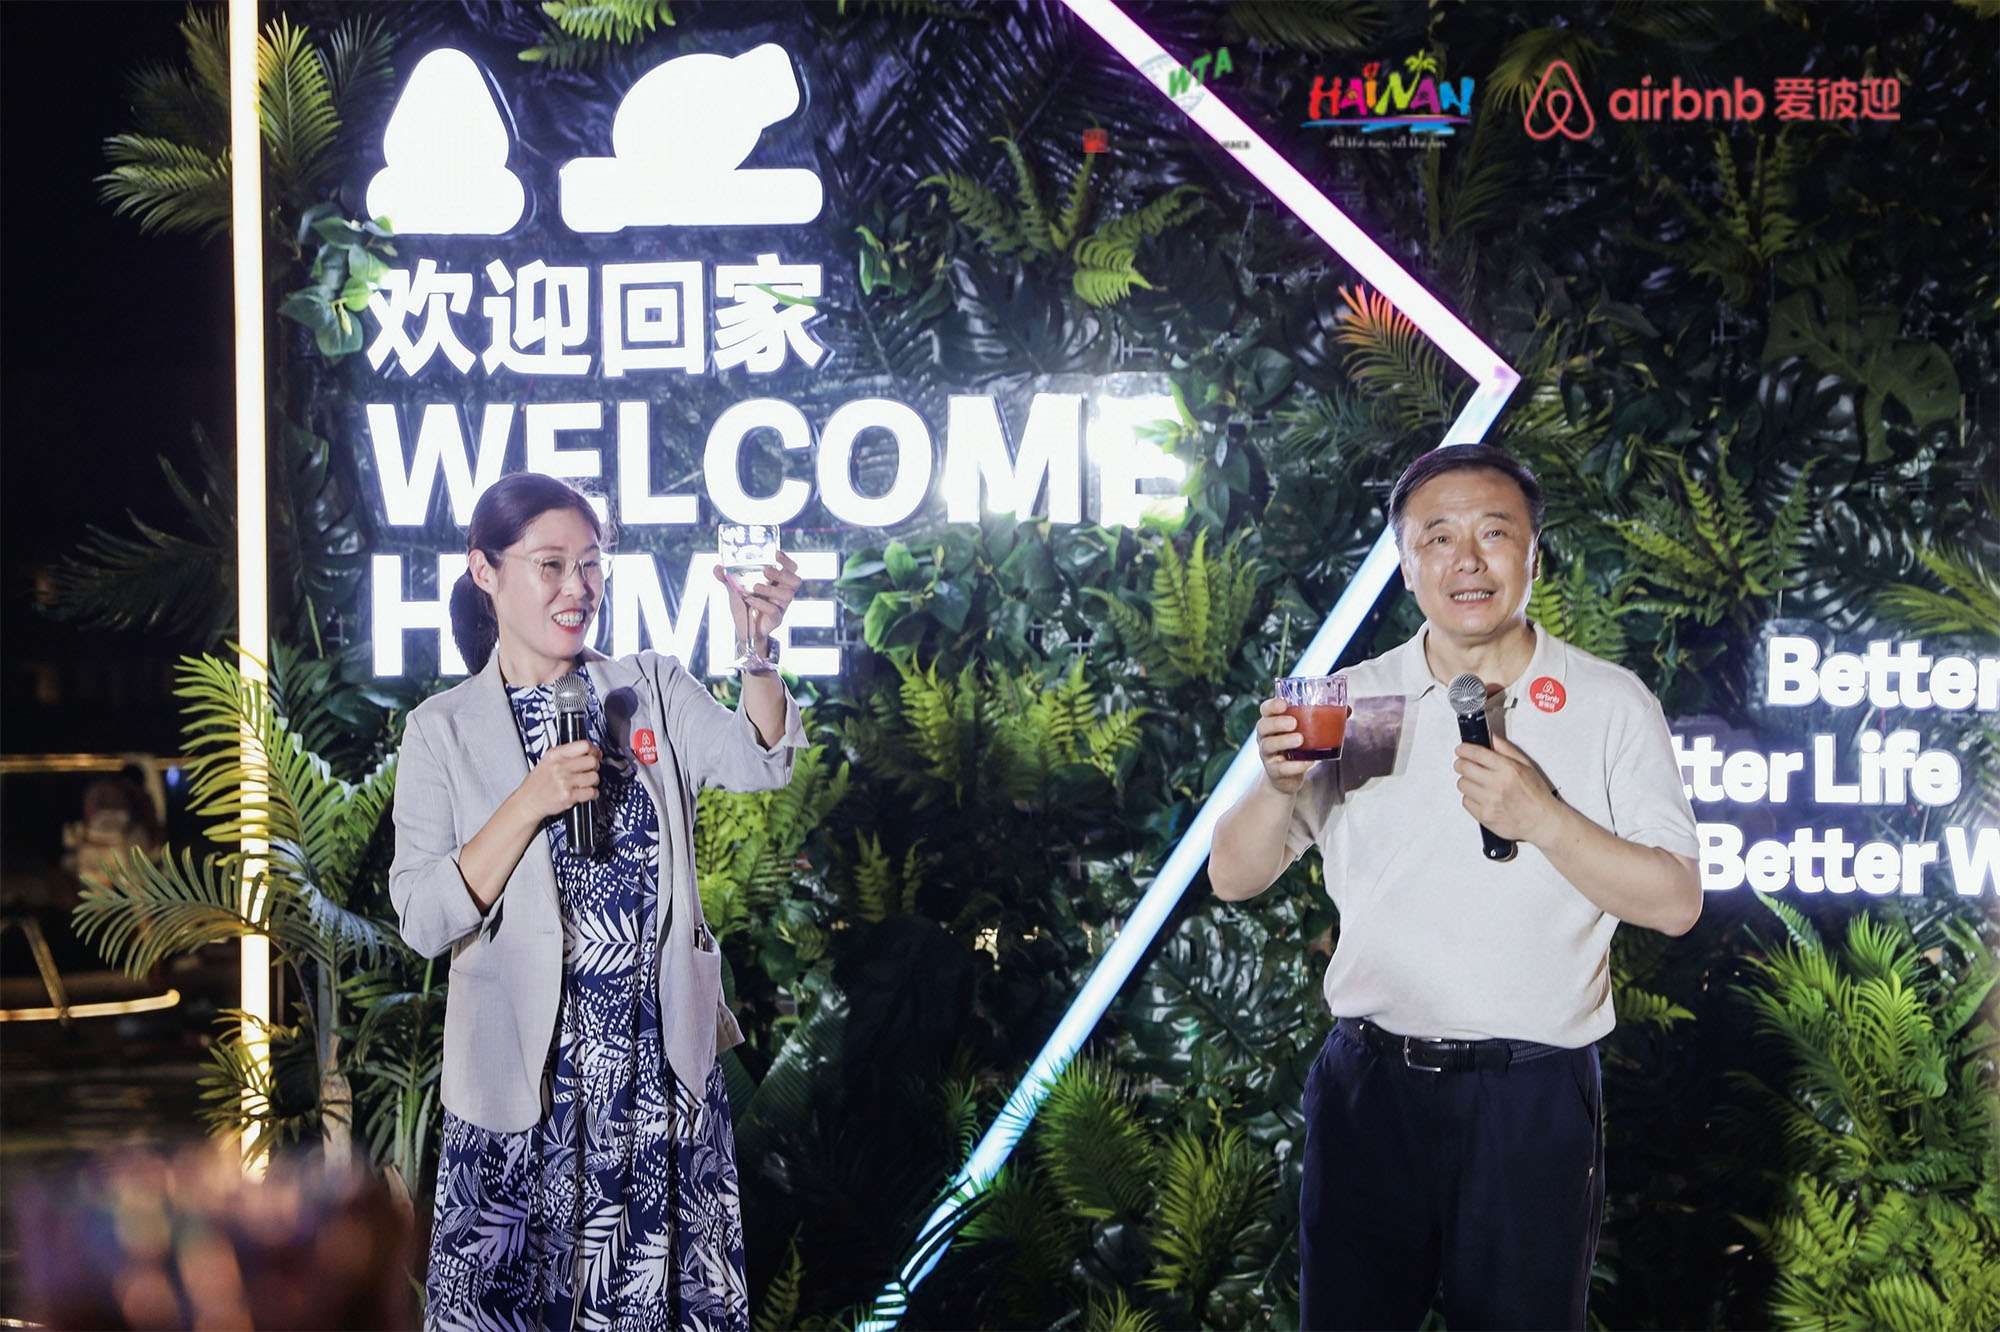 WELCOME HOME Members' Night Hosted by Airbnb